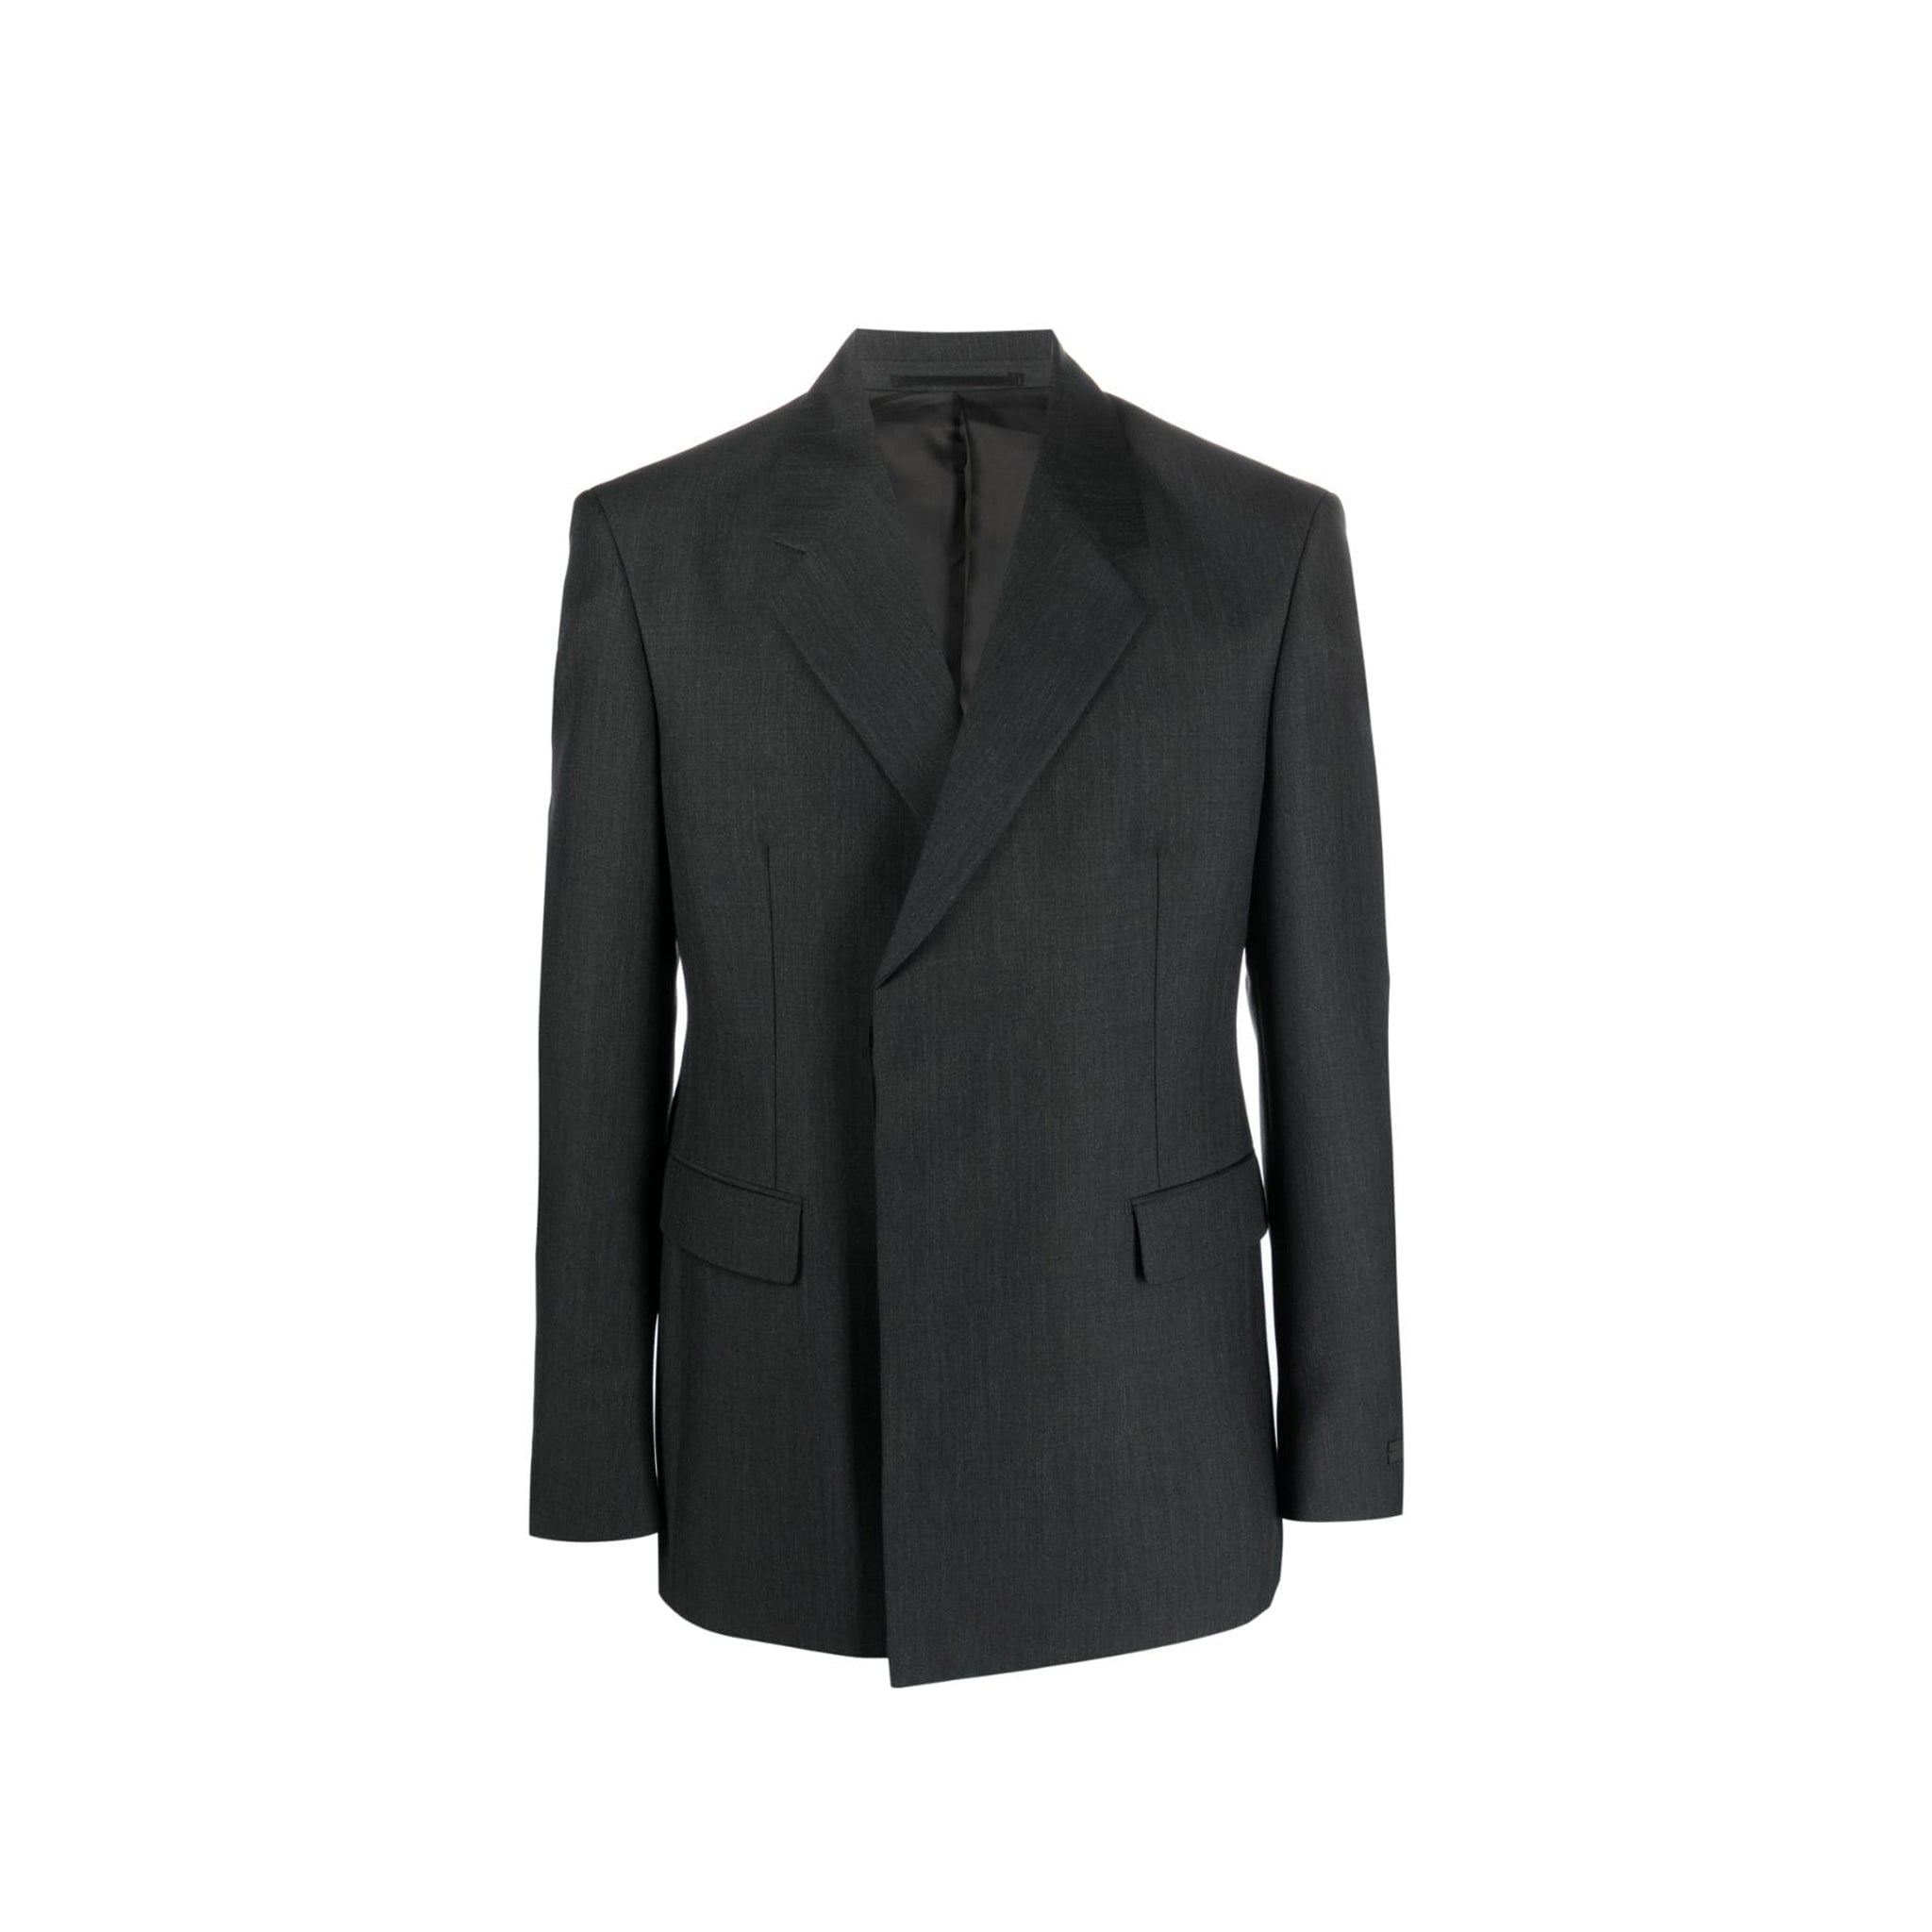 PRADA-Outlet-Sale-Prada Double-Breasted Wool Jacket-MEN CLOTHING-ARCHIVIST